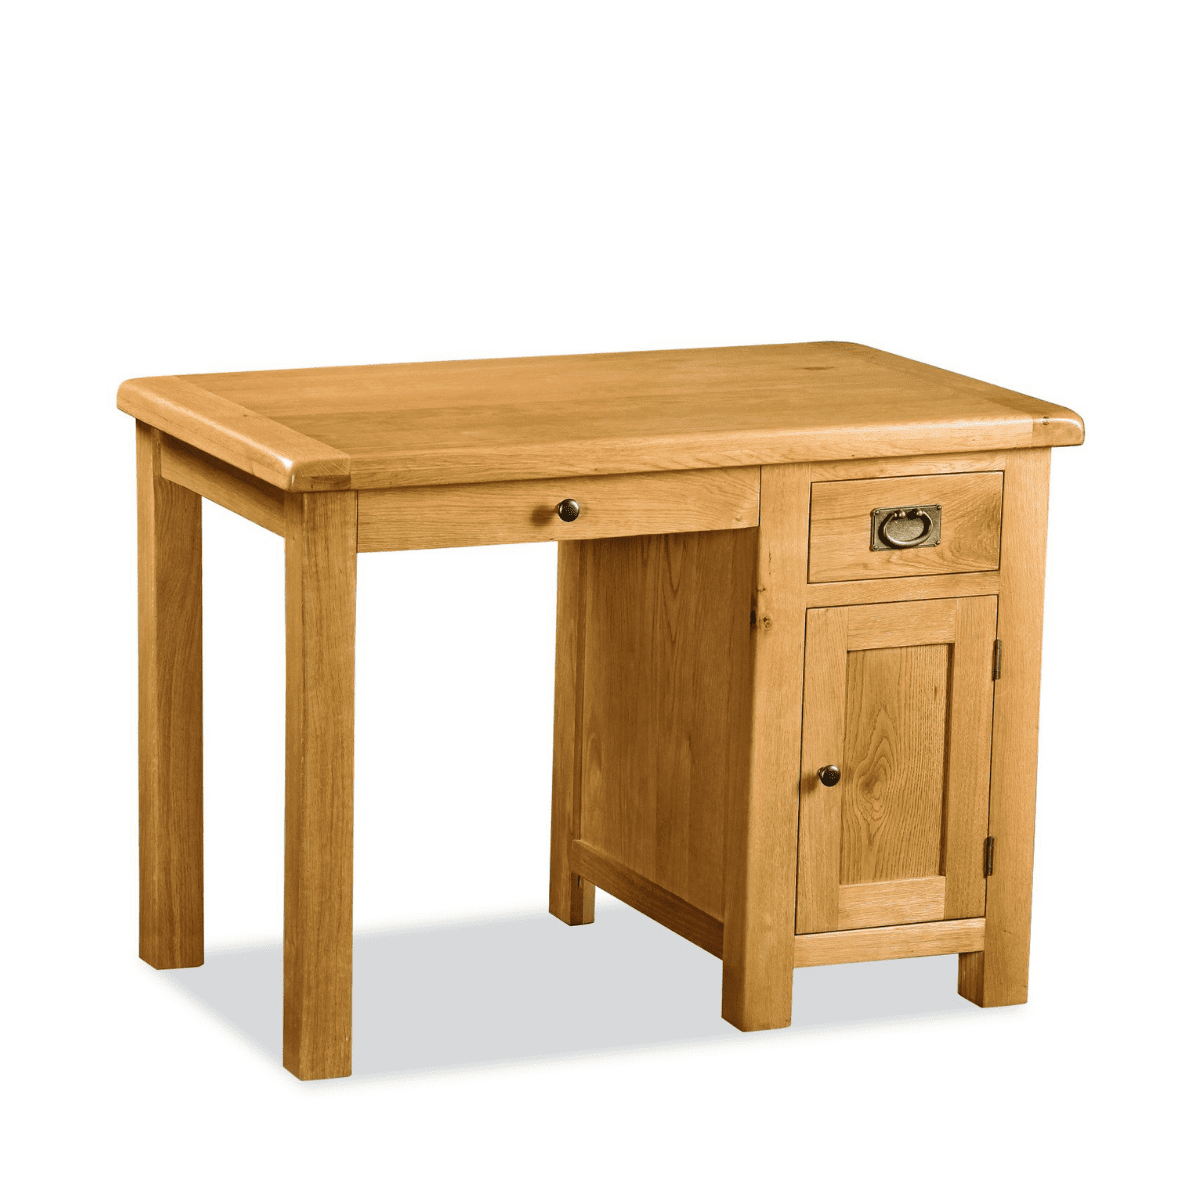 Sonia Oak Single Wood Office Desk Corcorans Furniture And Carpets